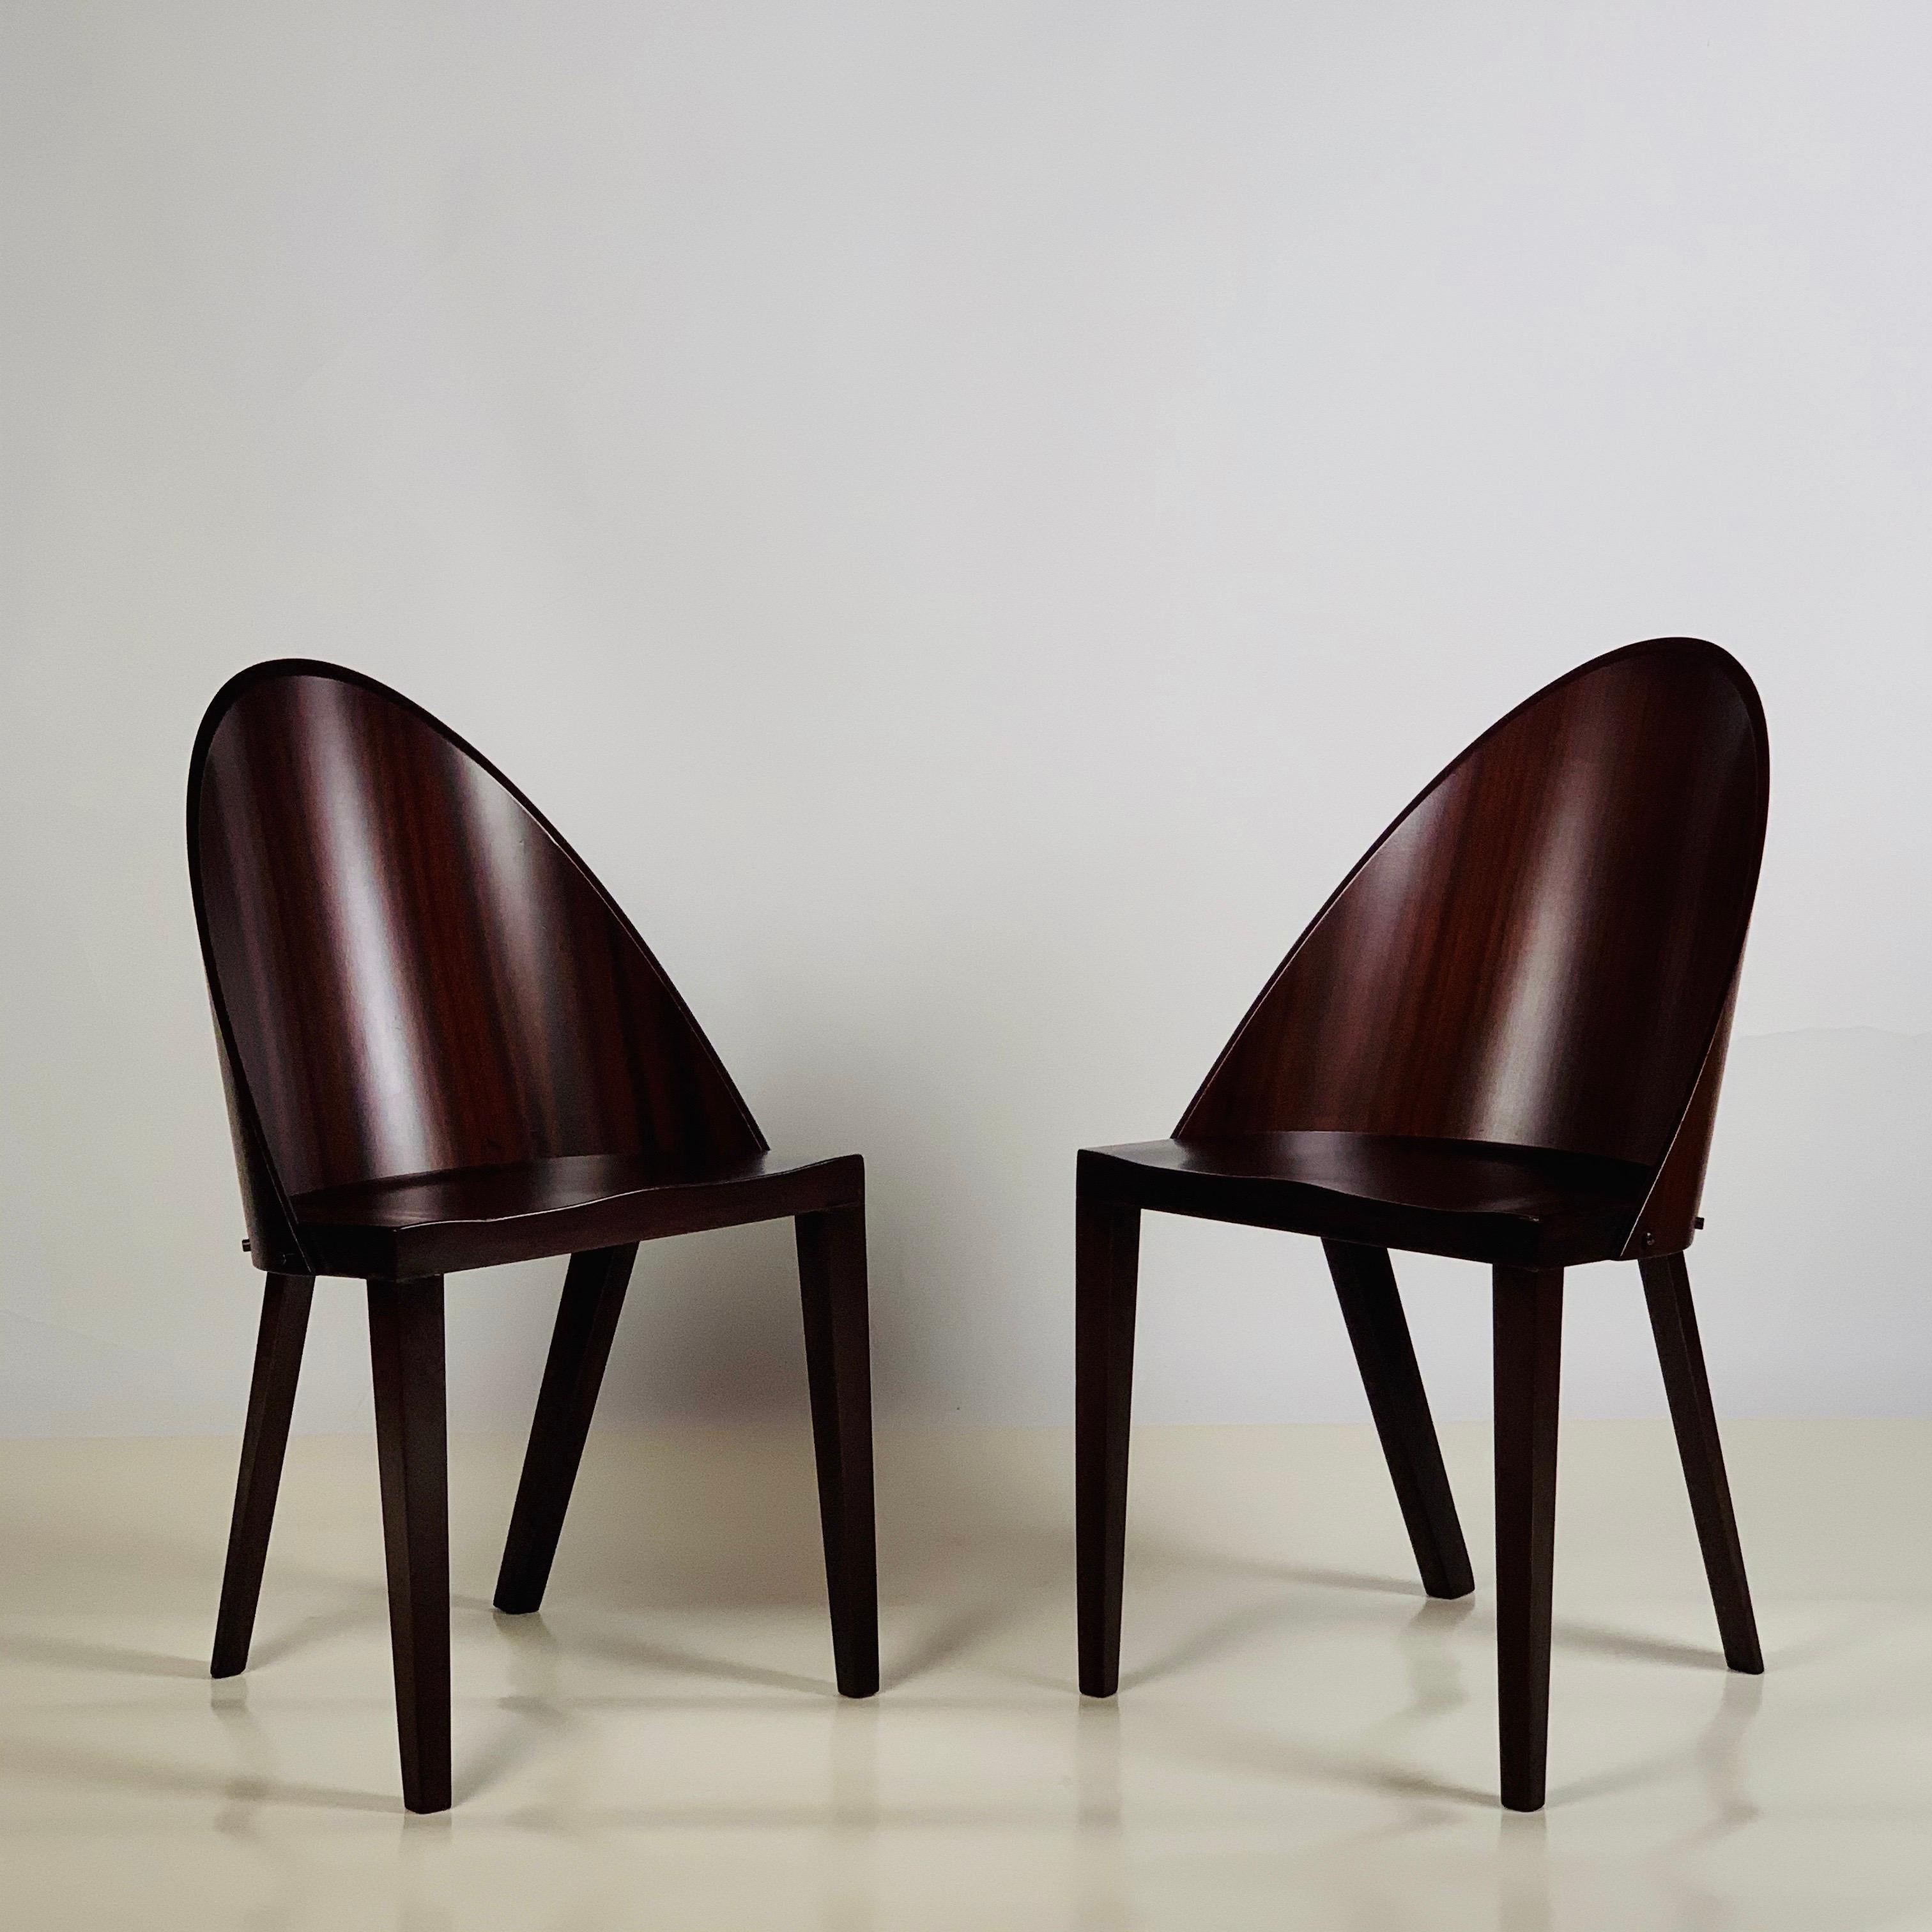 Rare pair of Philippe Starck chairs from the Royalton Hotel, NYC. Original label. Royalton Hotel is located just east of Times Square in Manhattan at 44 West 44th Street. It was the first hotel designed by Philippe Starck and reopened on October 10,